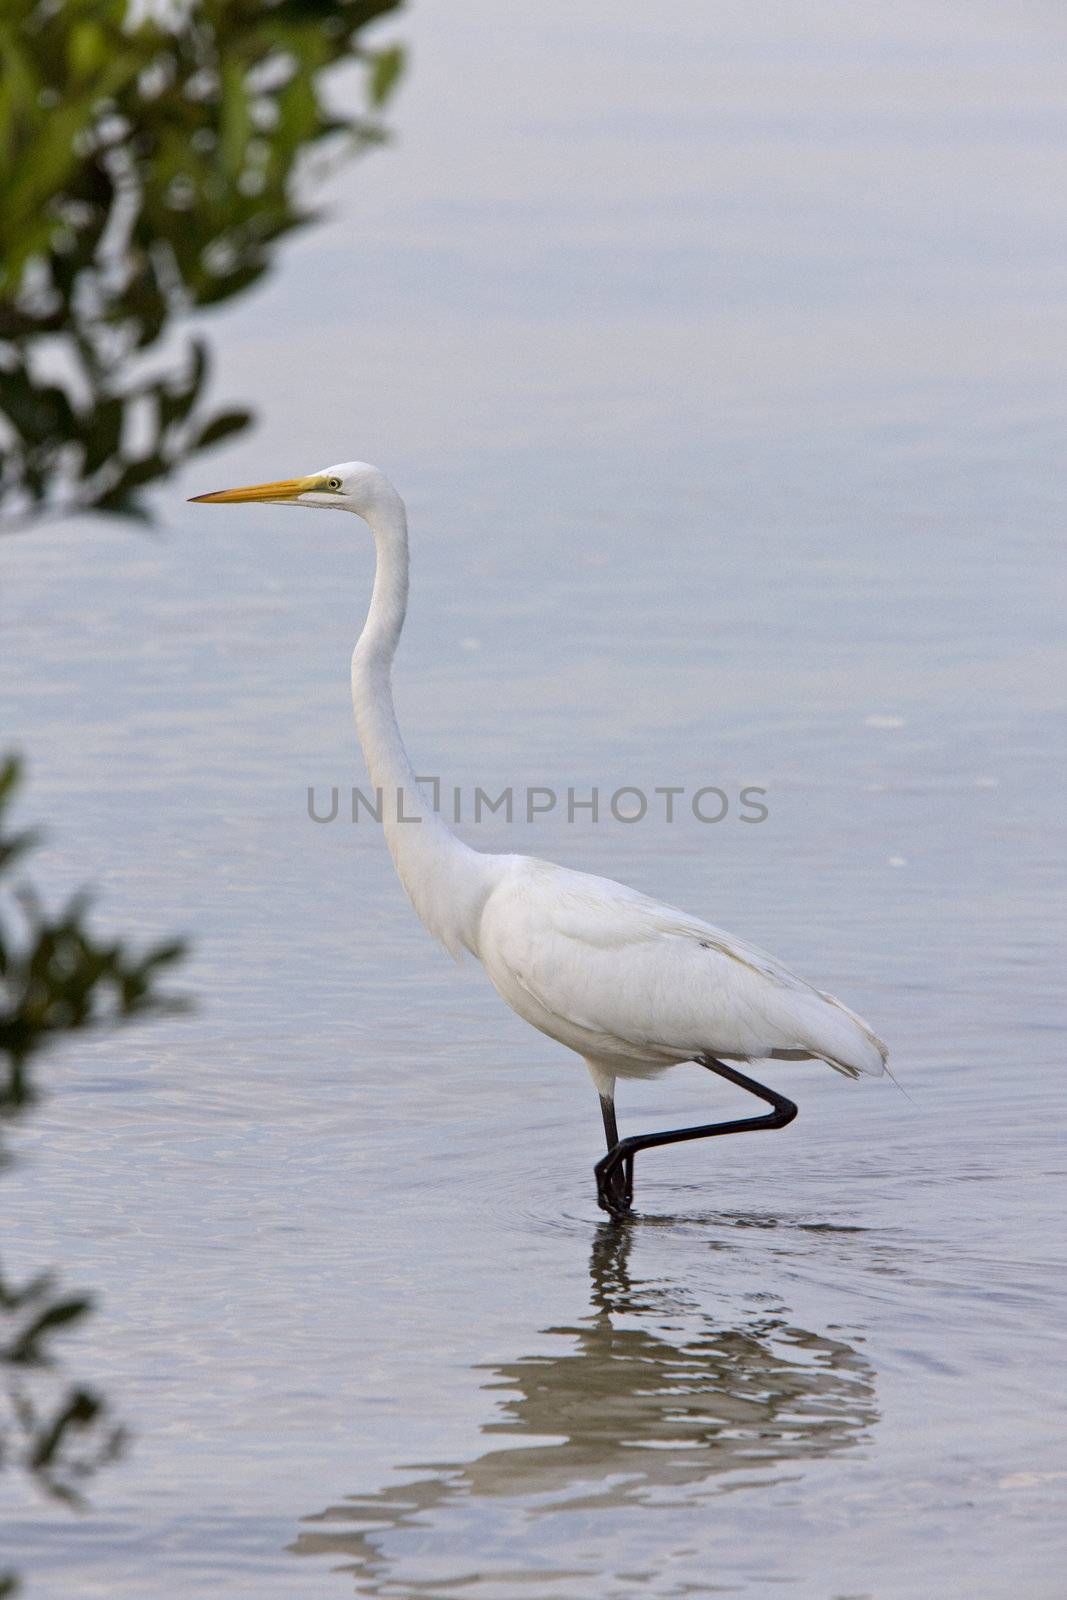 Great White Egret wading in Florida waters